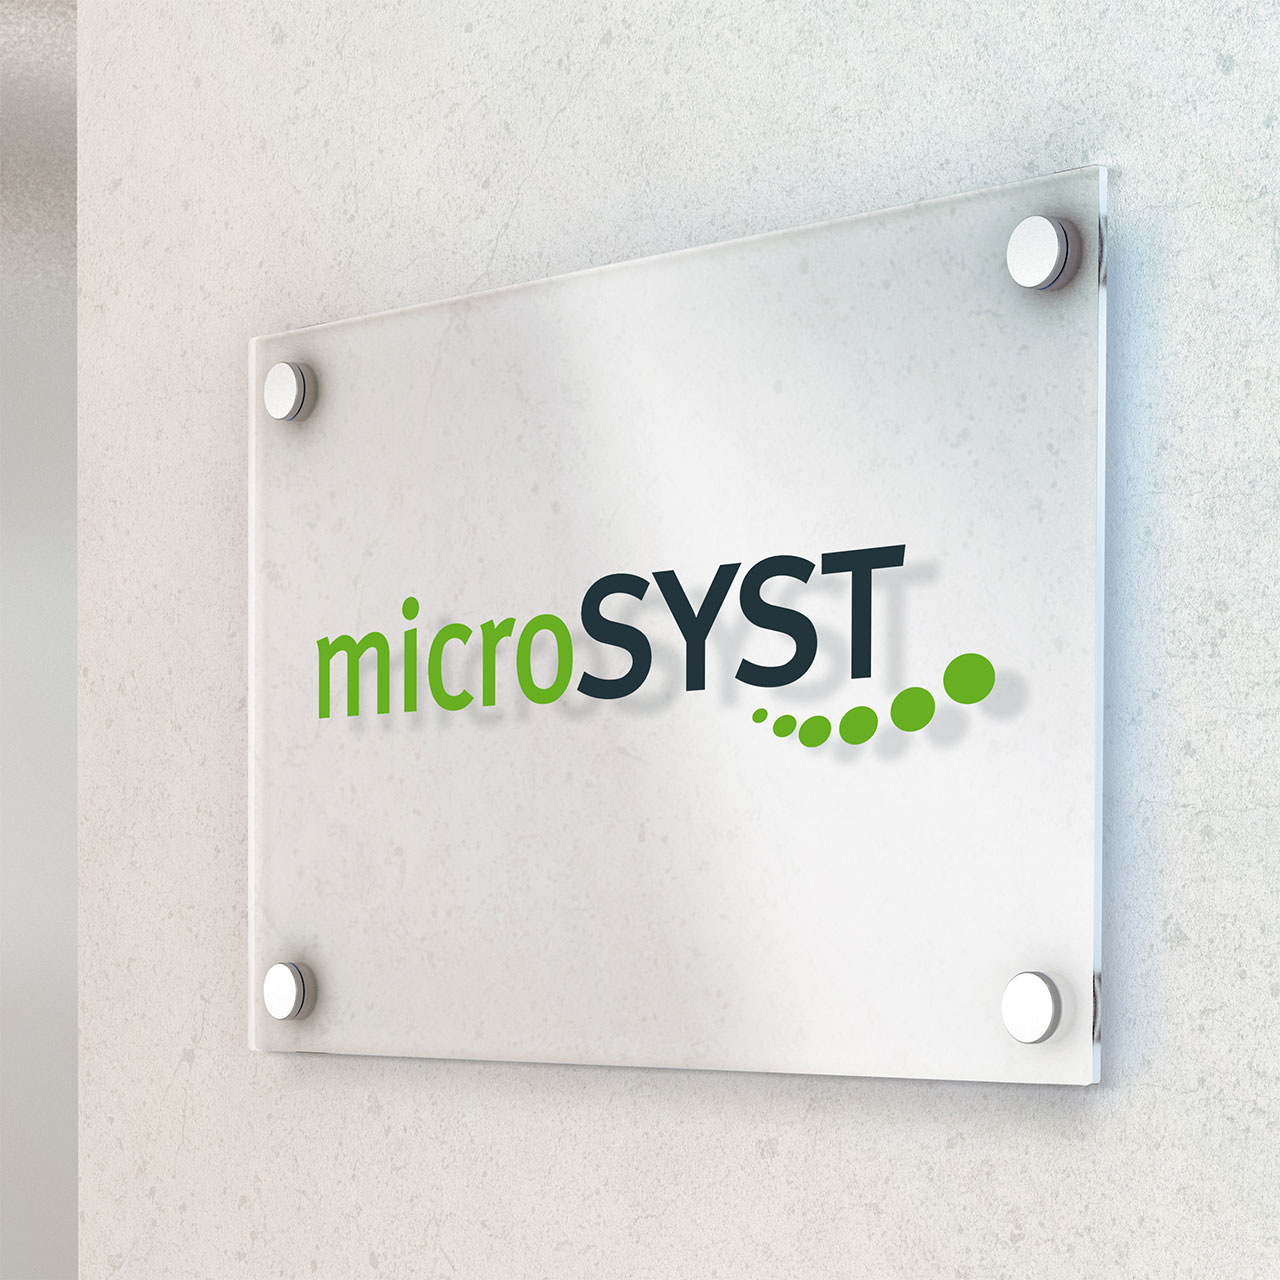 microsyst